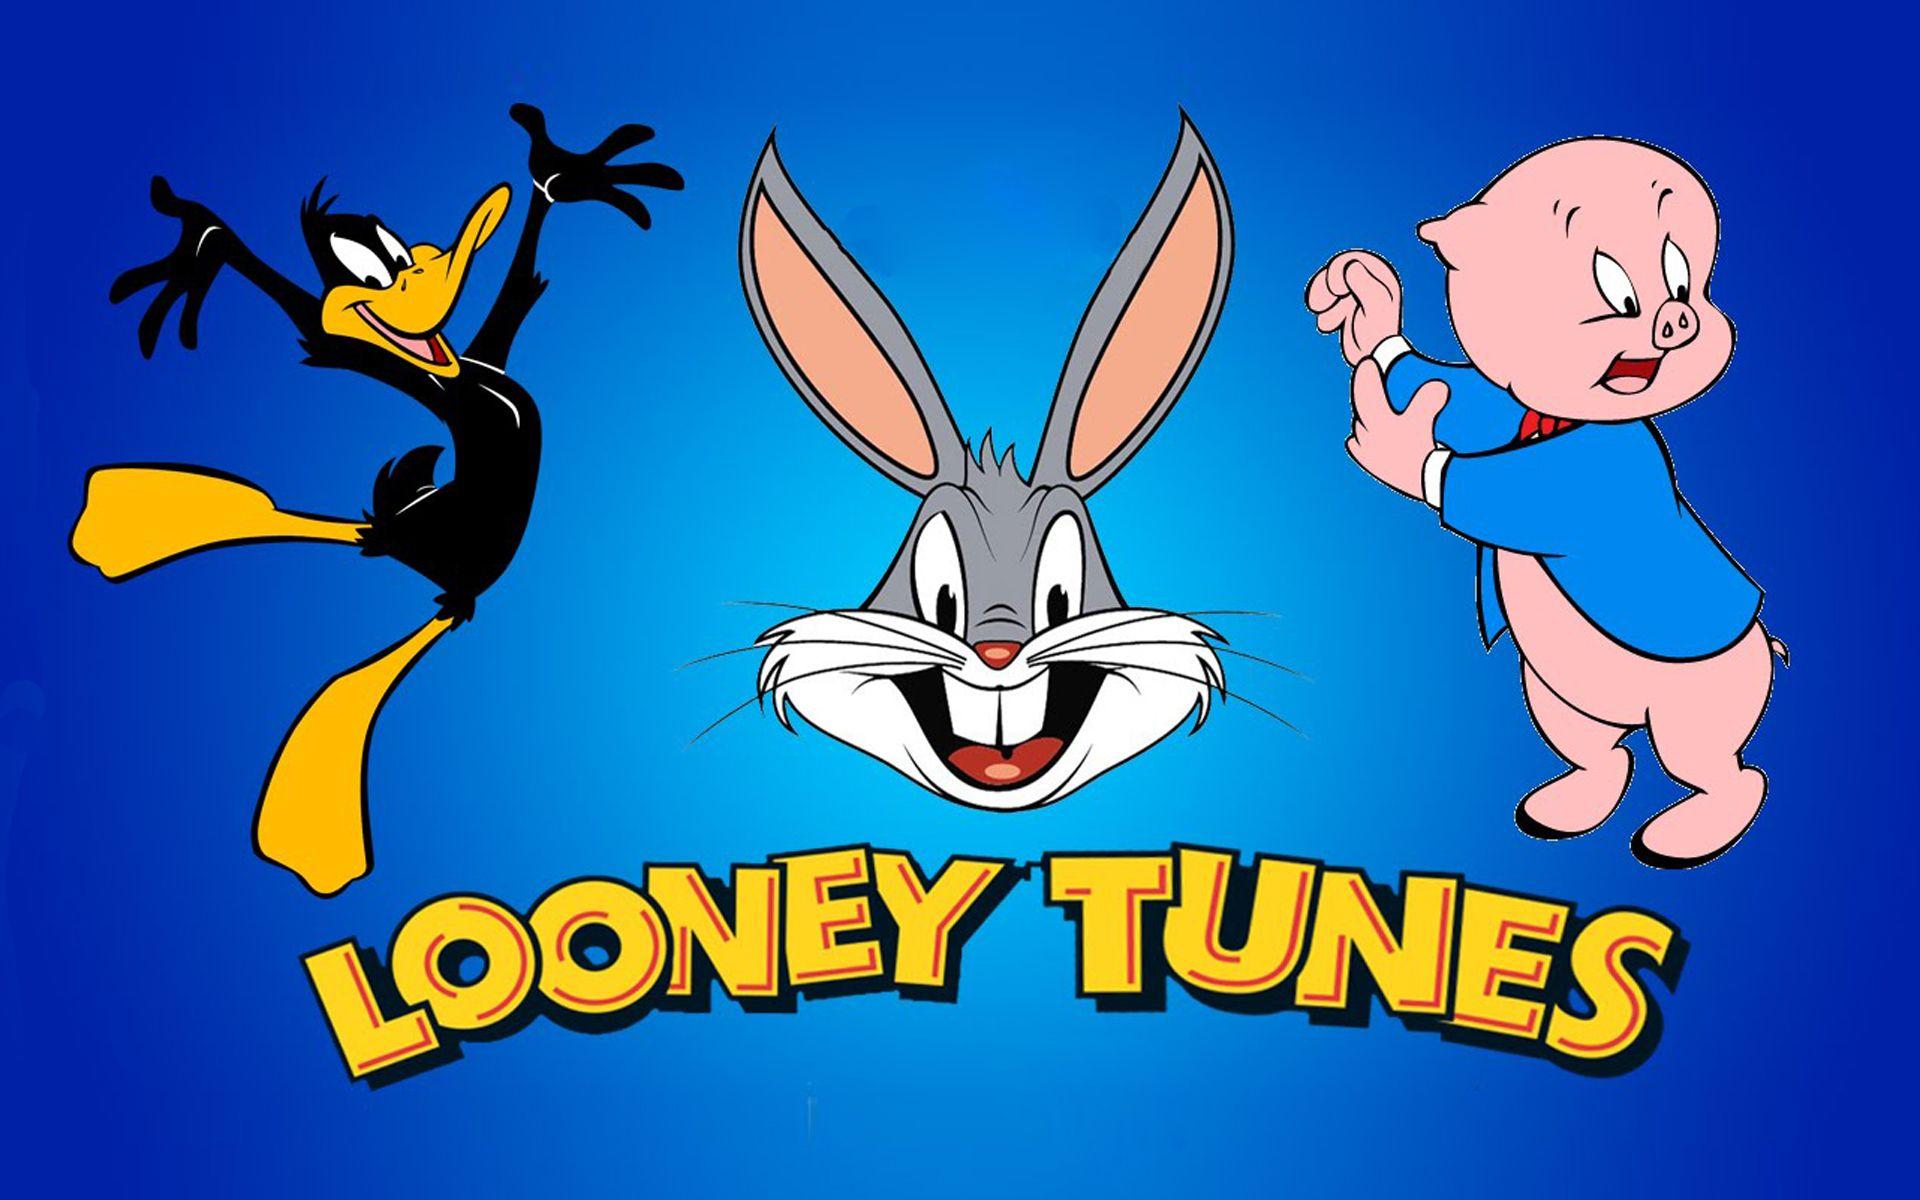 Looney Tunes Movie Bugs Bunny Daffy Duck And Porky Pig Cartoons